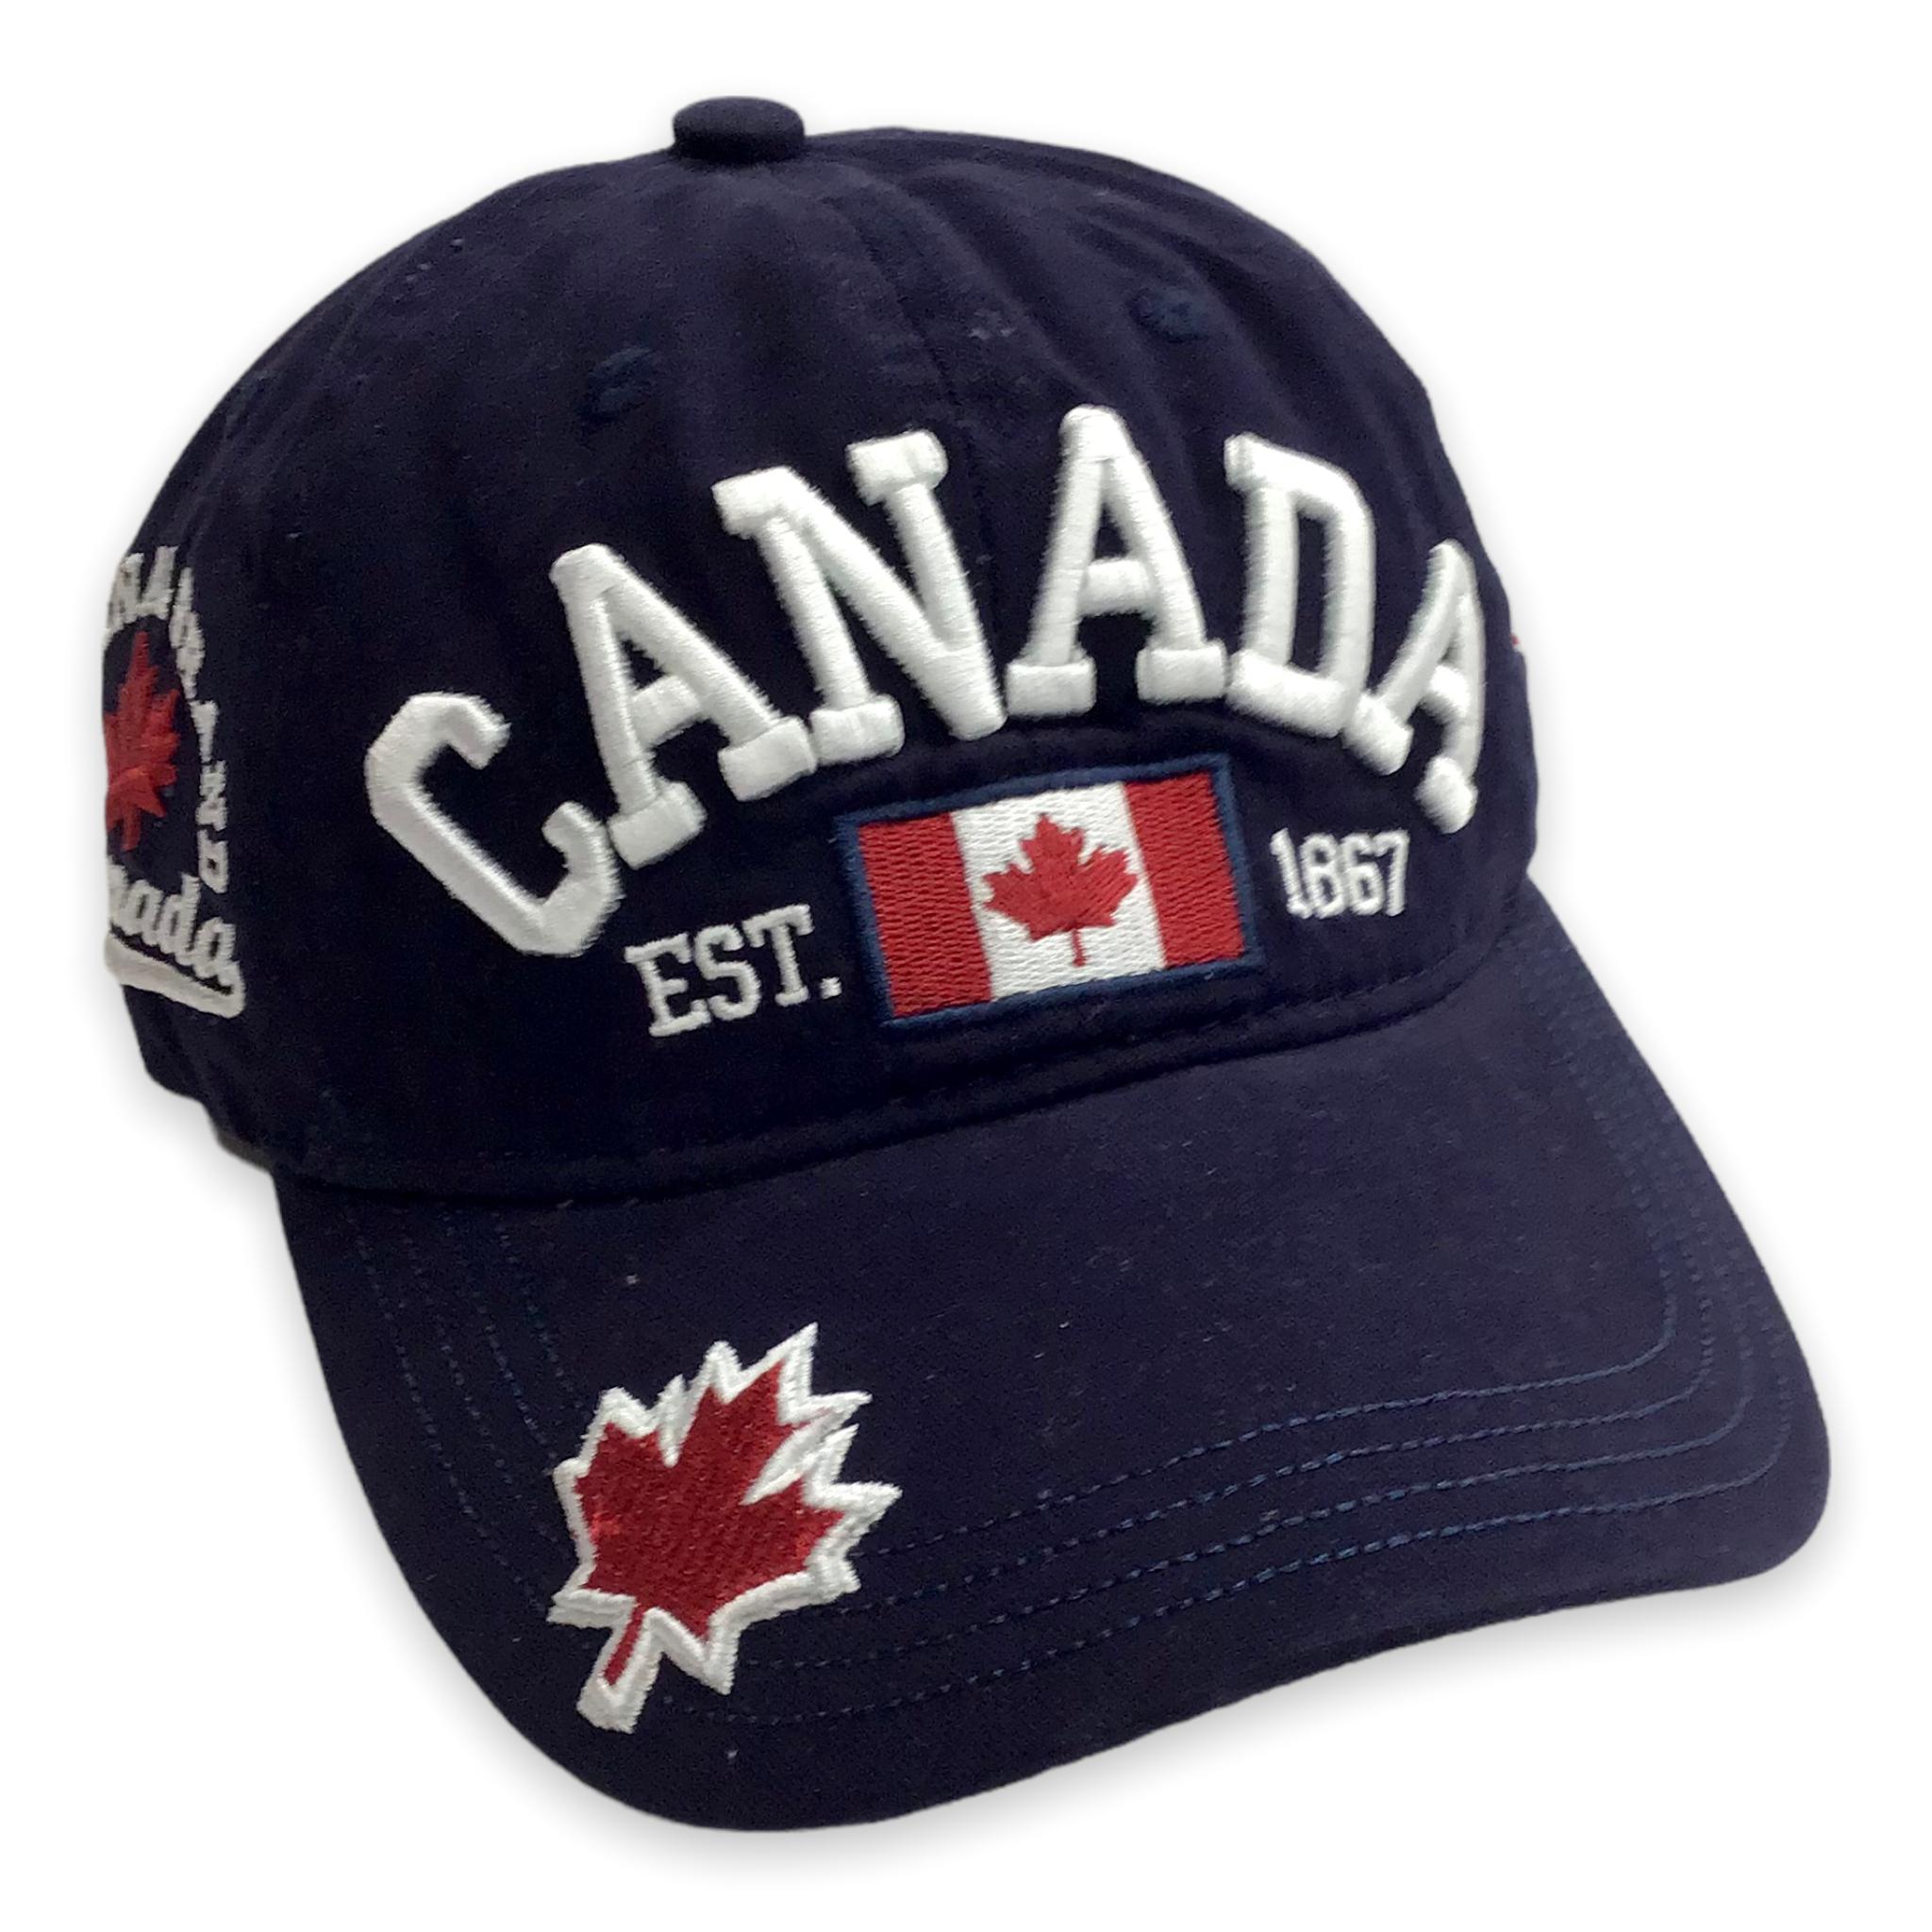 Kids Navy Baseball Cap - Youth Embroidered Canada Est. 1867 Free Adjustable Hat